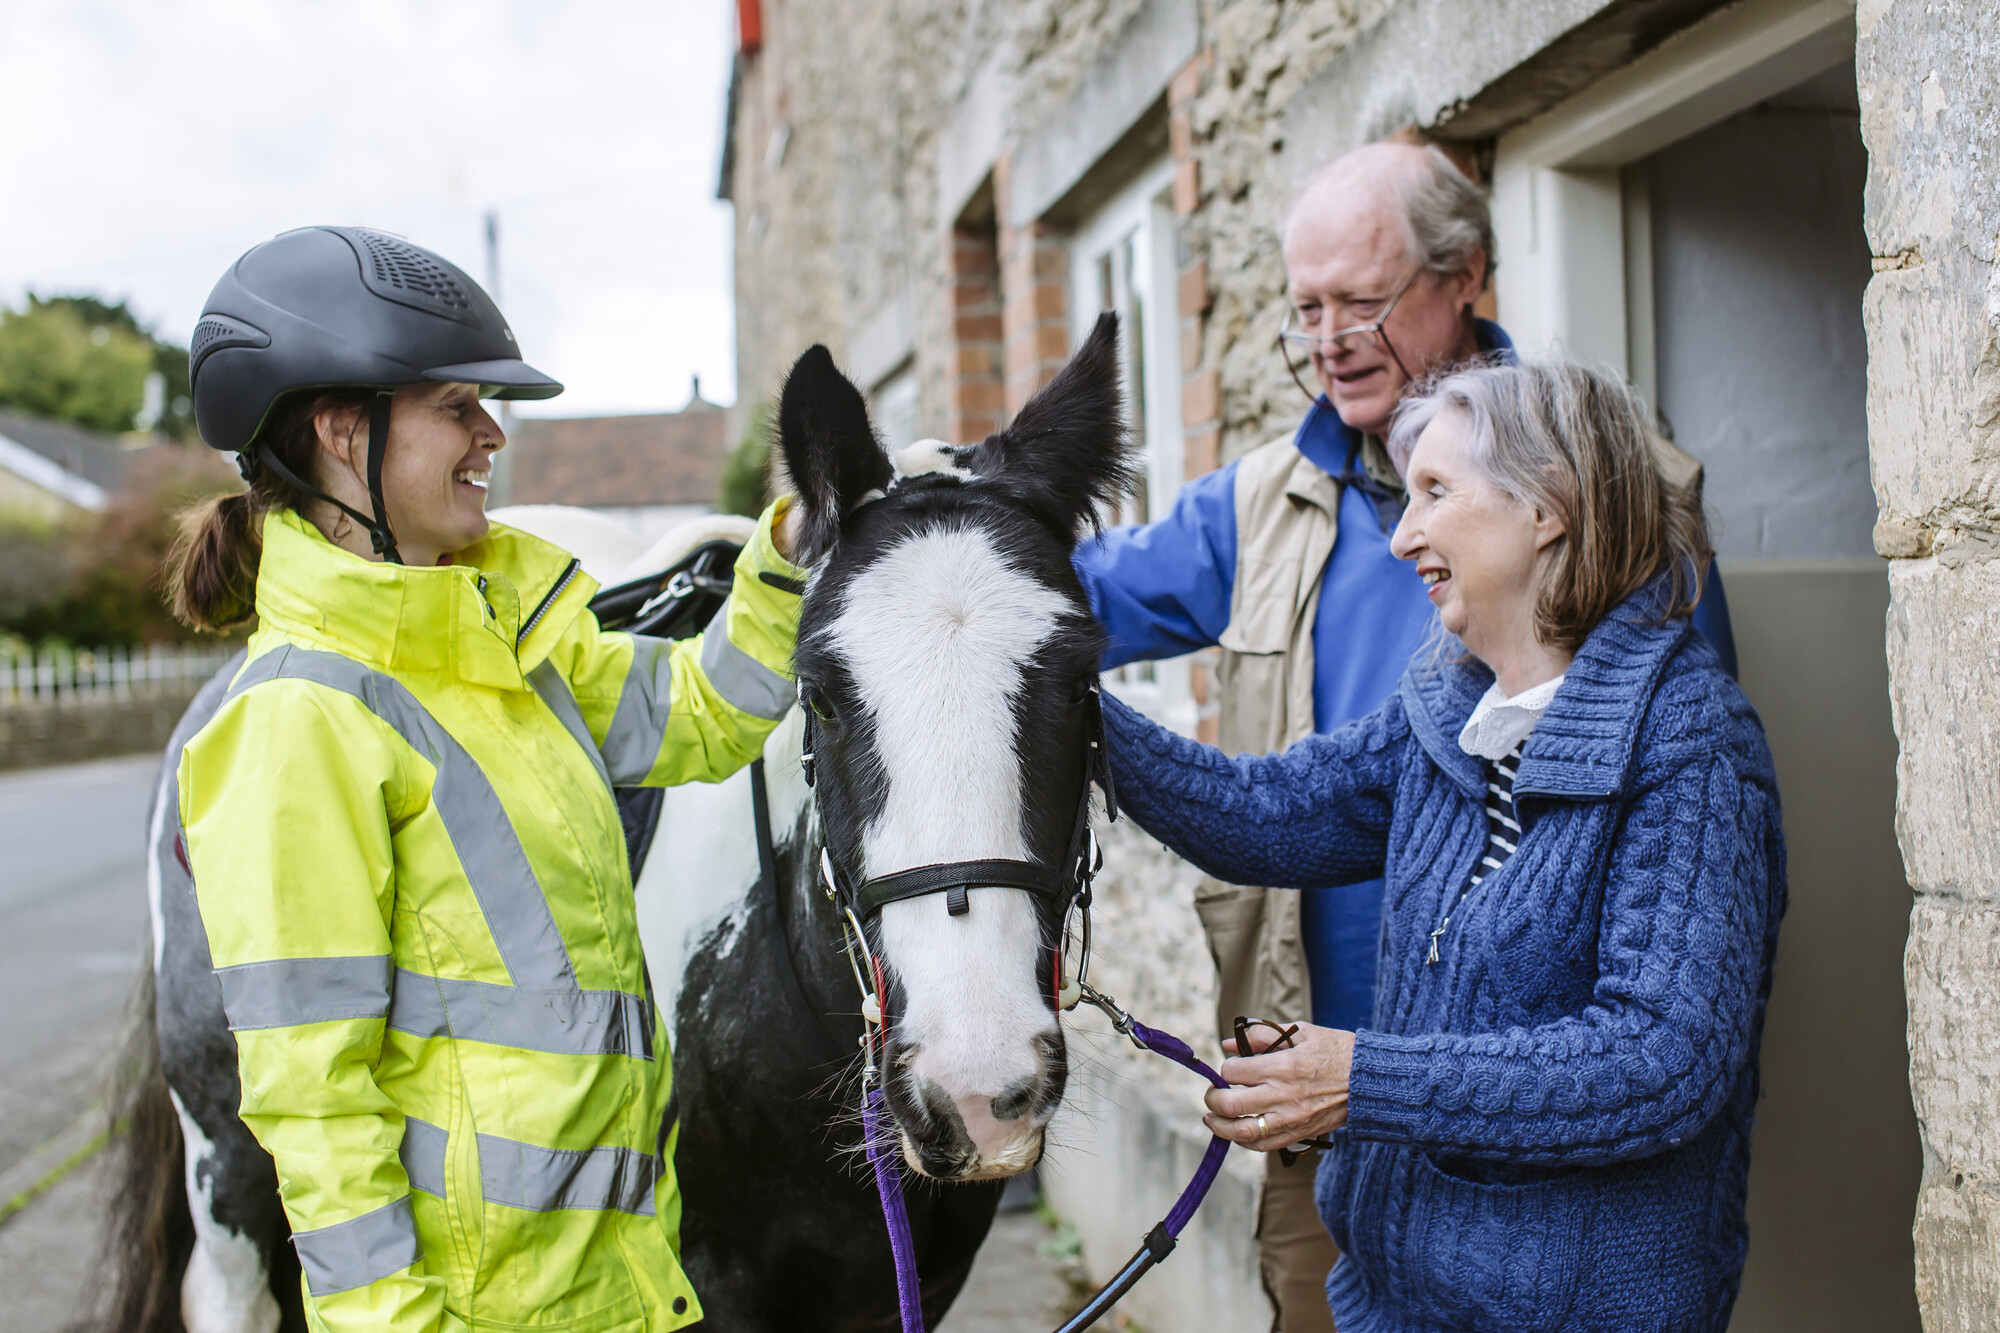 Black and white horse is stroked by woman and man outside their home